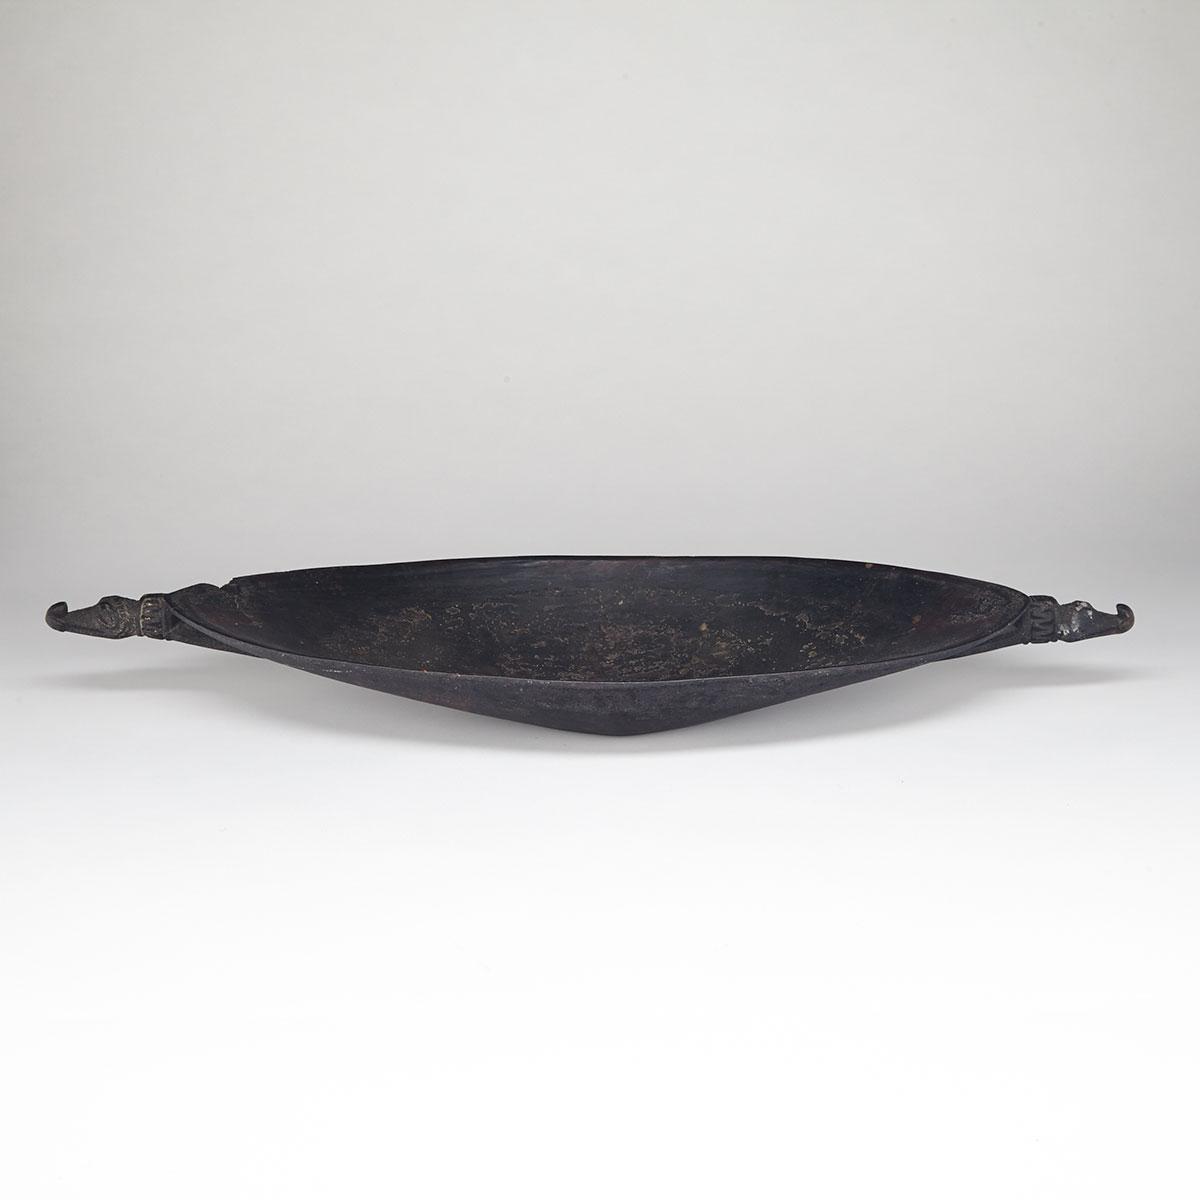 Papua New Guinea East Sepik Province Wooden Bowl, late 19th/early 20th century